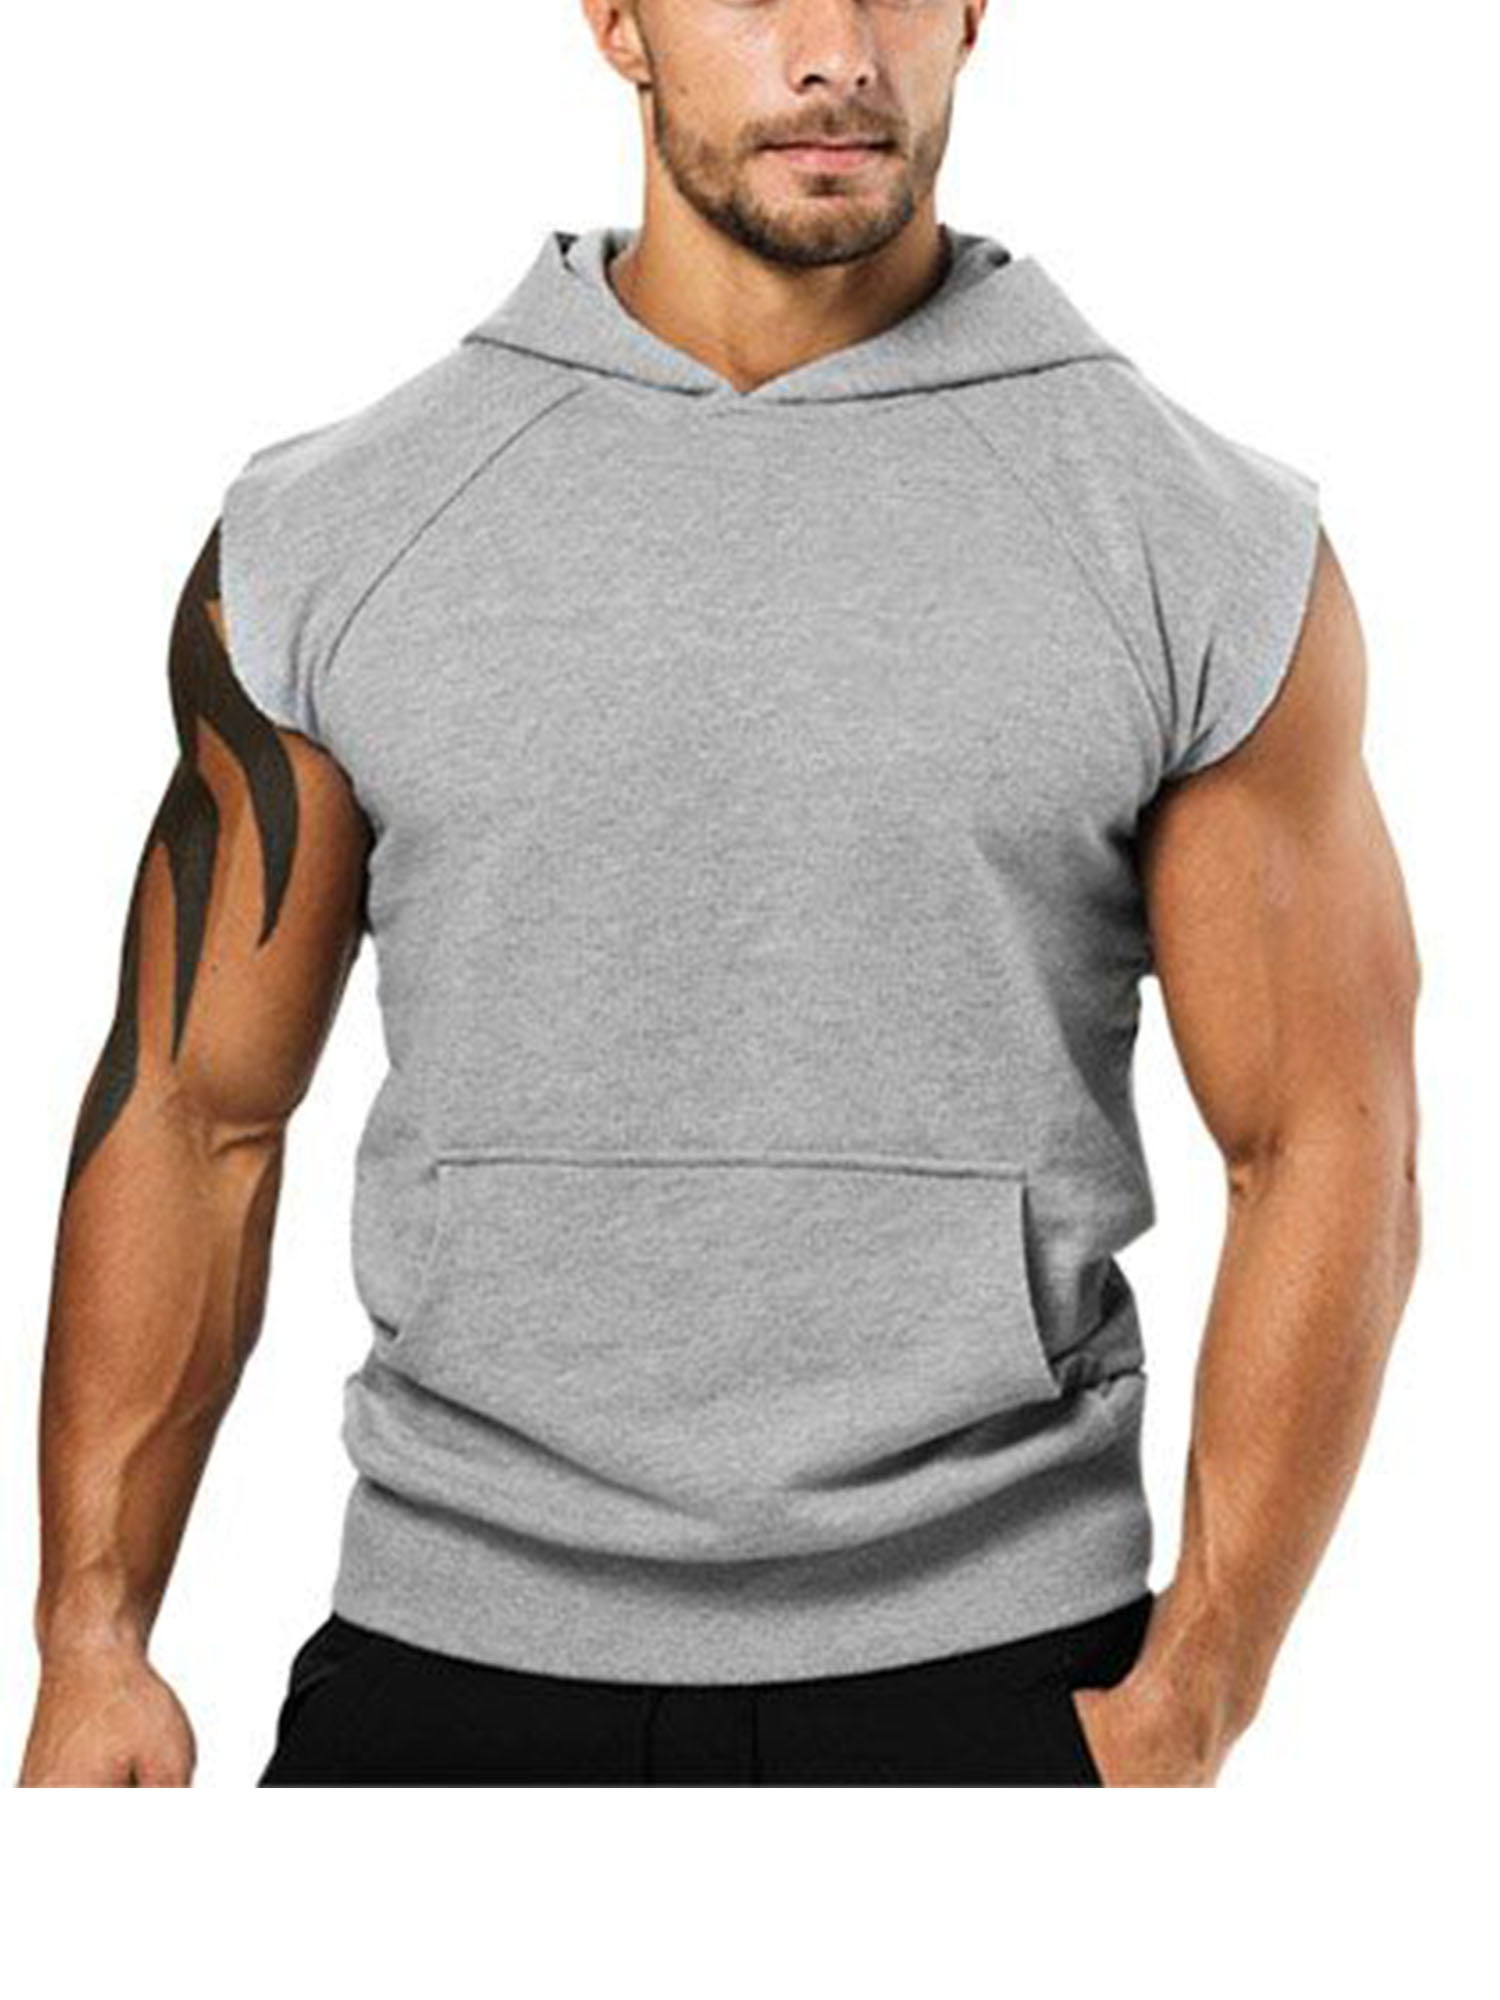 Lehmanlin Men’s Sleeveless Workout Hoodies Gym Tank Tops Muscle Bodybuilding With Pockets 